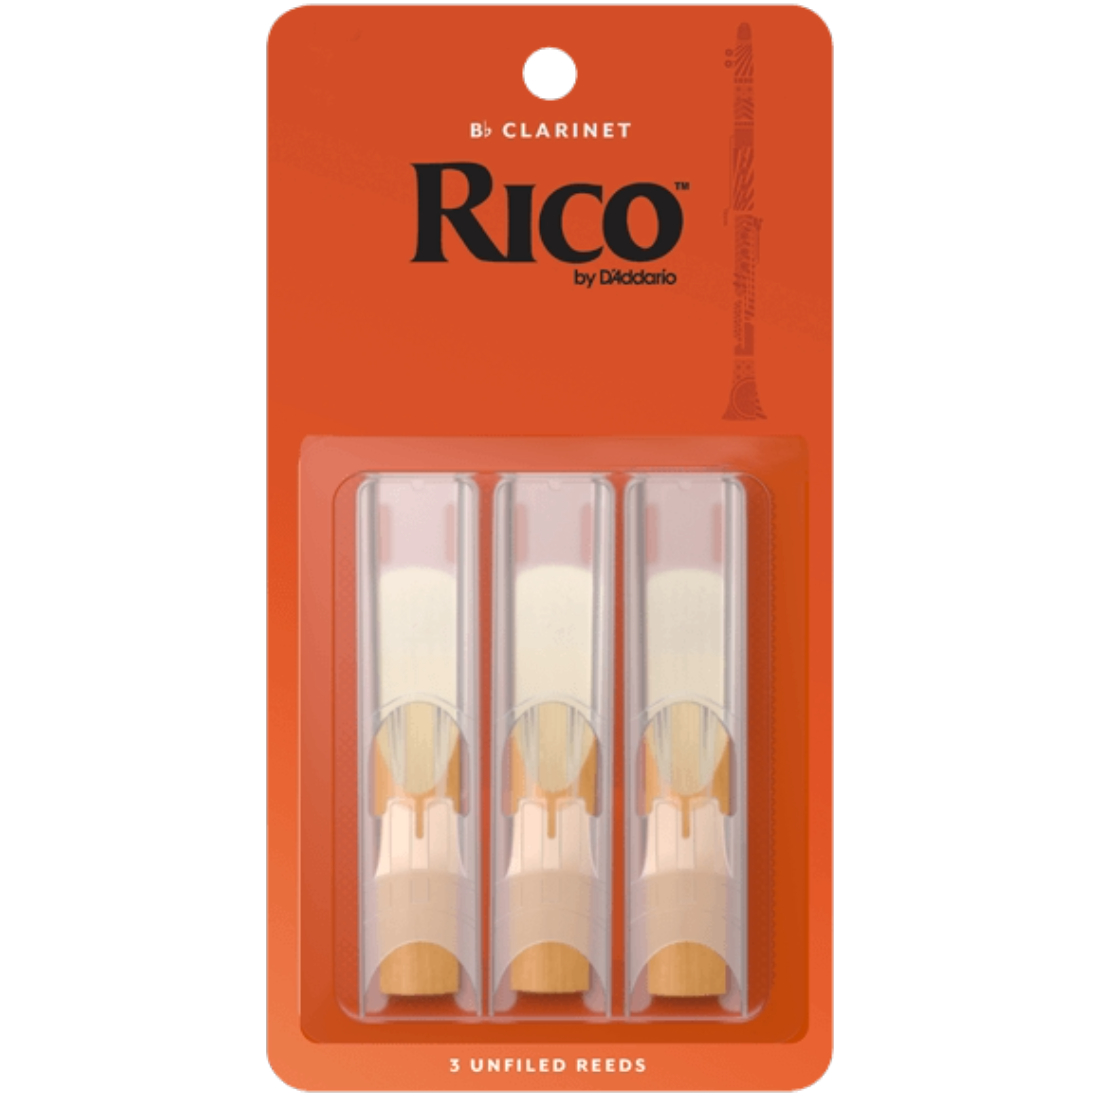 Orange Pack of Three of Rico by D'addario B Flat Clarinet reeds, Strength Two